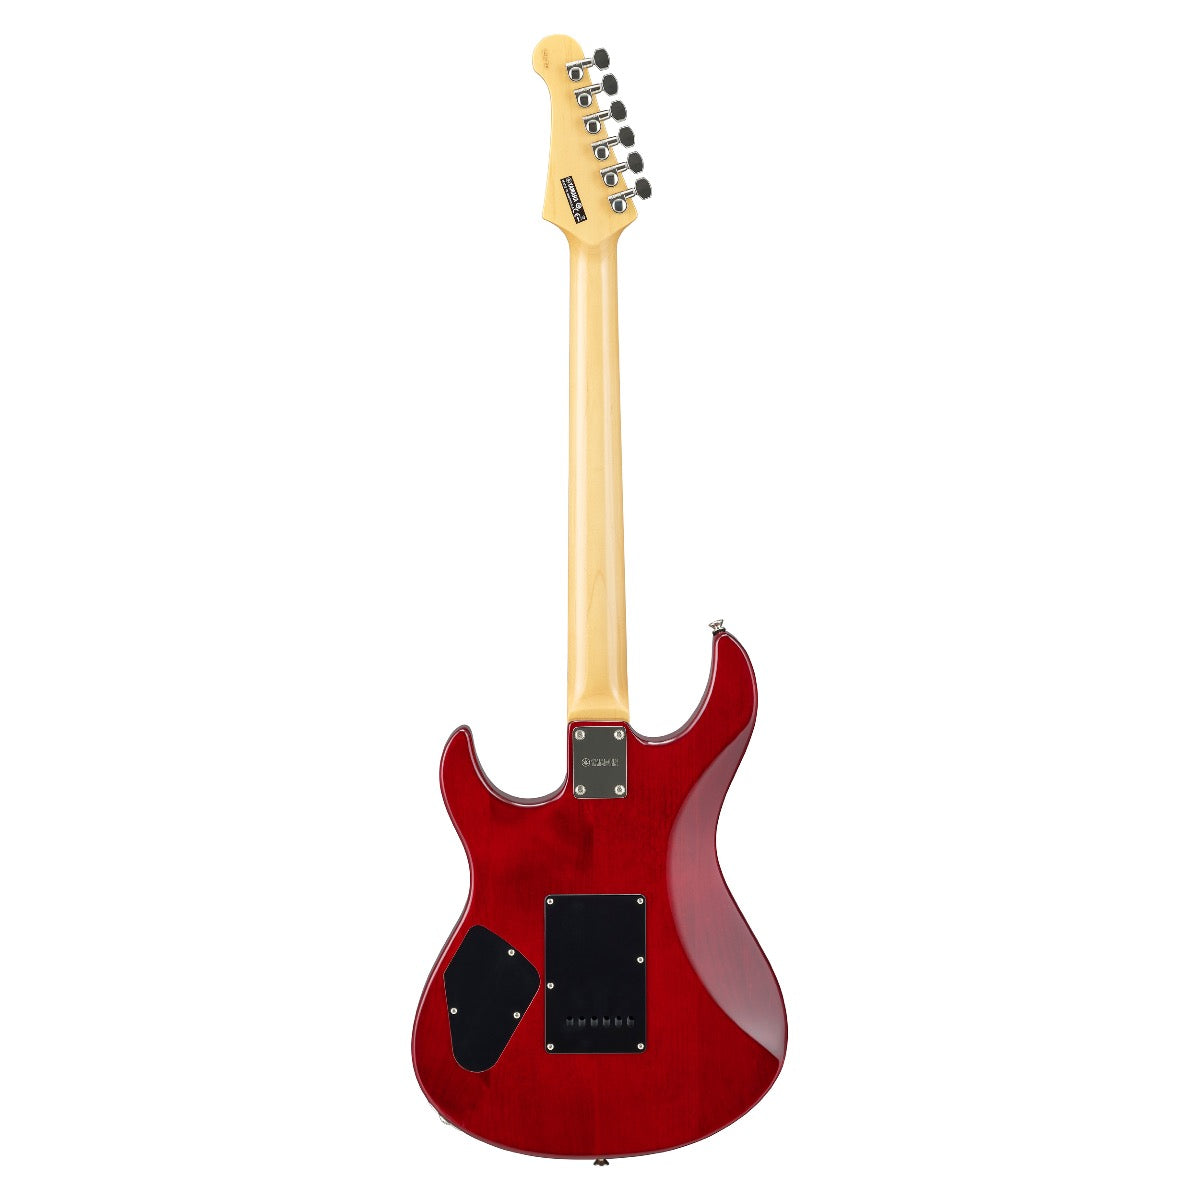 Yamaha Pacifica PAC612VIIFMXFRD Electric Guitar - Fired Red